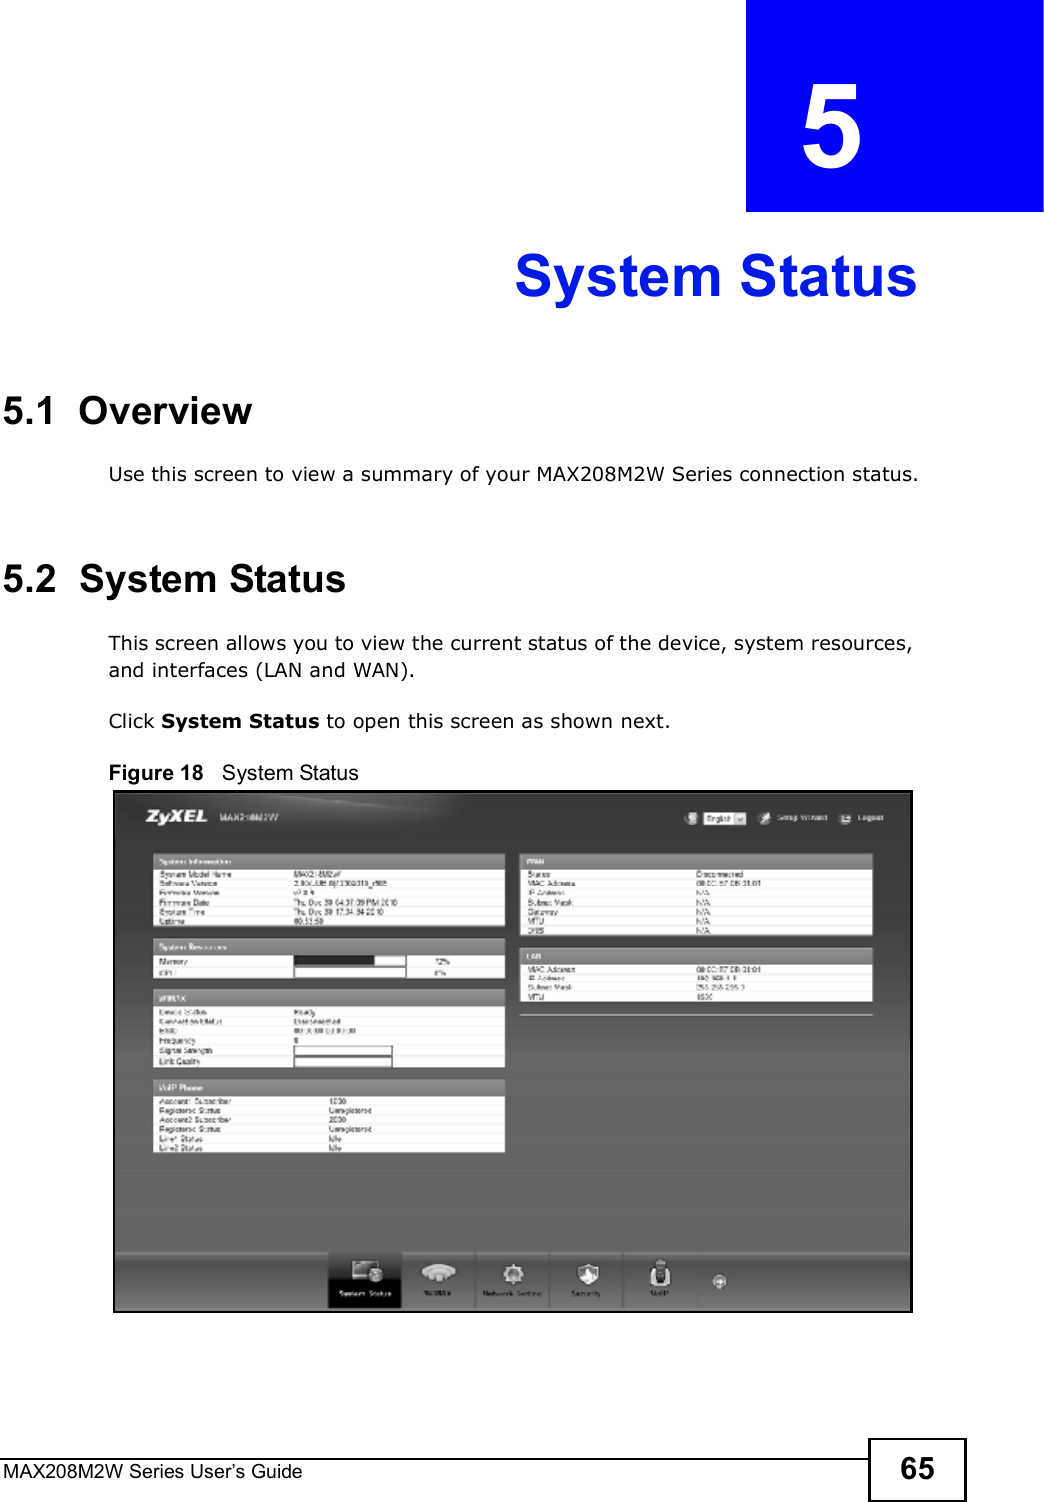 MAX208M2W Series User s Guide 65CHAPTER  5 System Status5.1  OverviewUse this screen to view a summary of your MAX208M2W Series connection status.5.2  System StatusThis screen allows you to view the current status of the device, system resources, and interfaces (LAN and WAN).Click System Status to open this screen as shown next.Figure 18   System Status